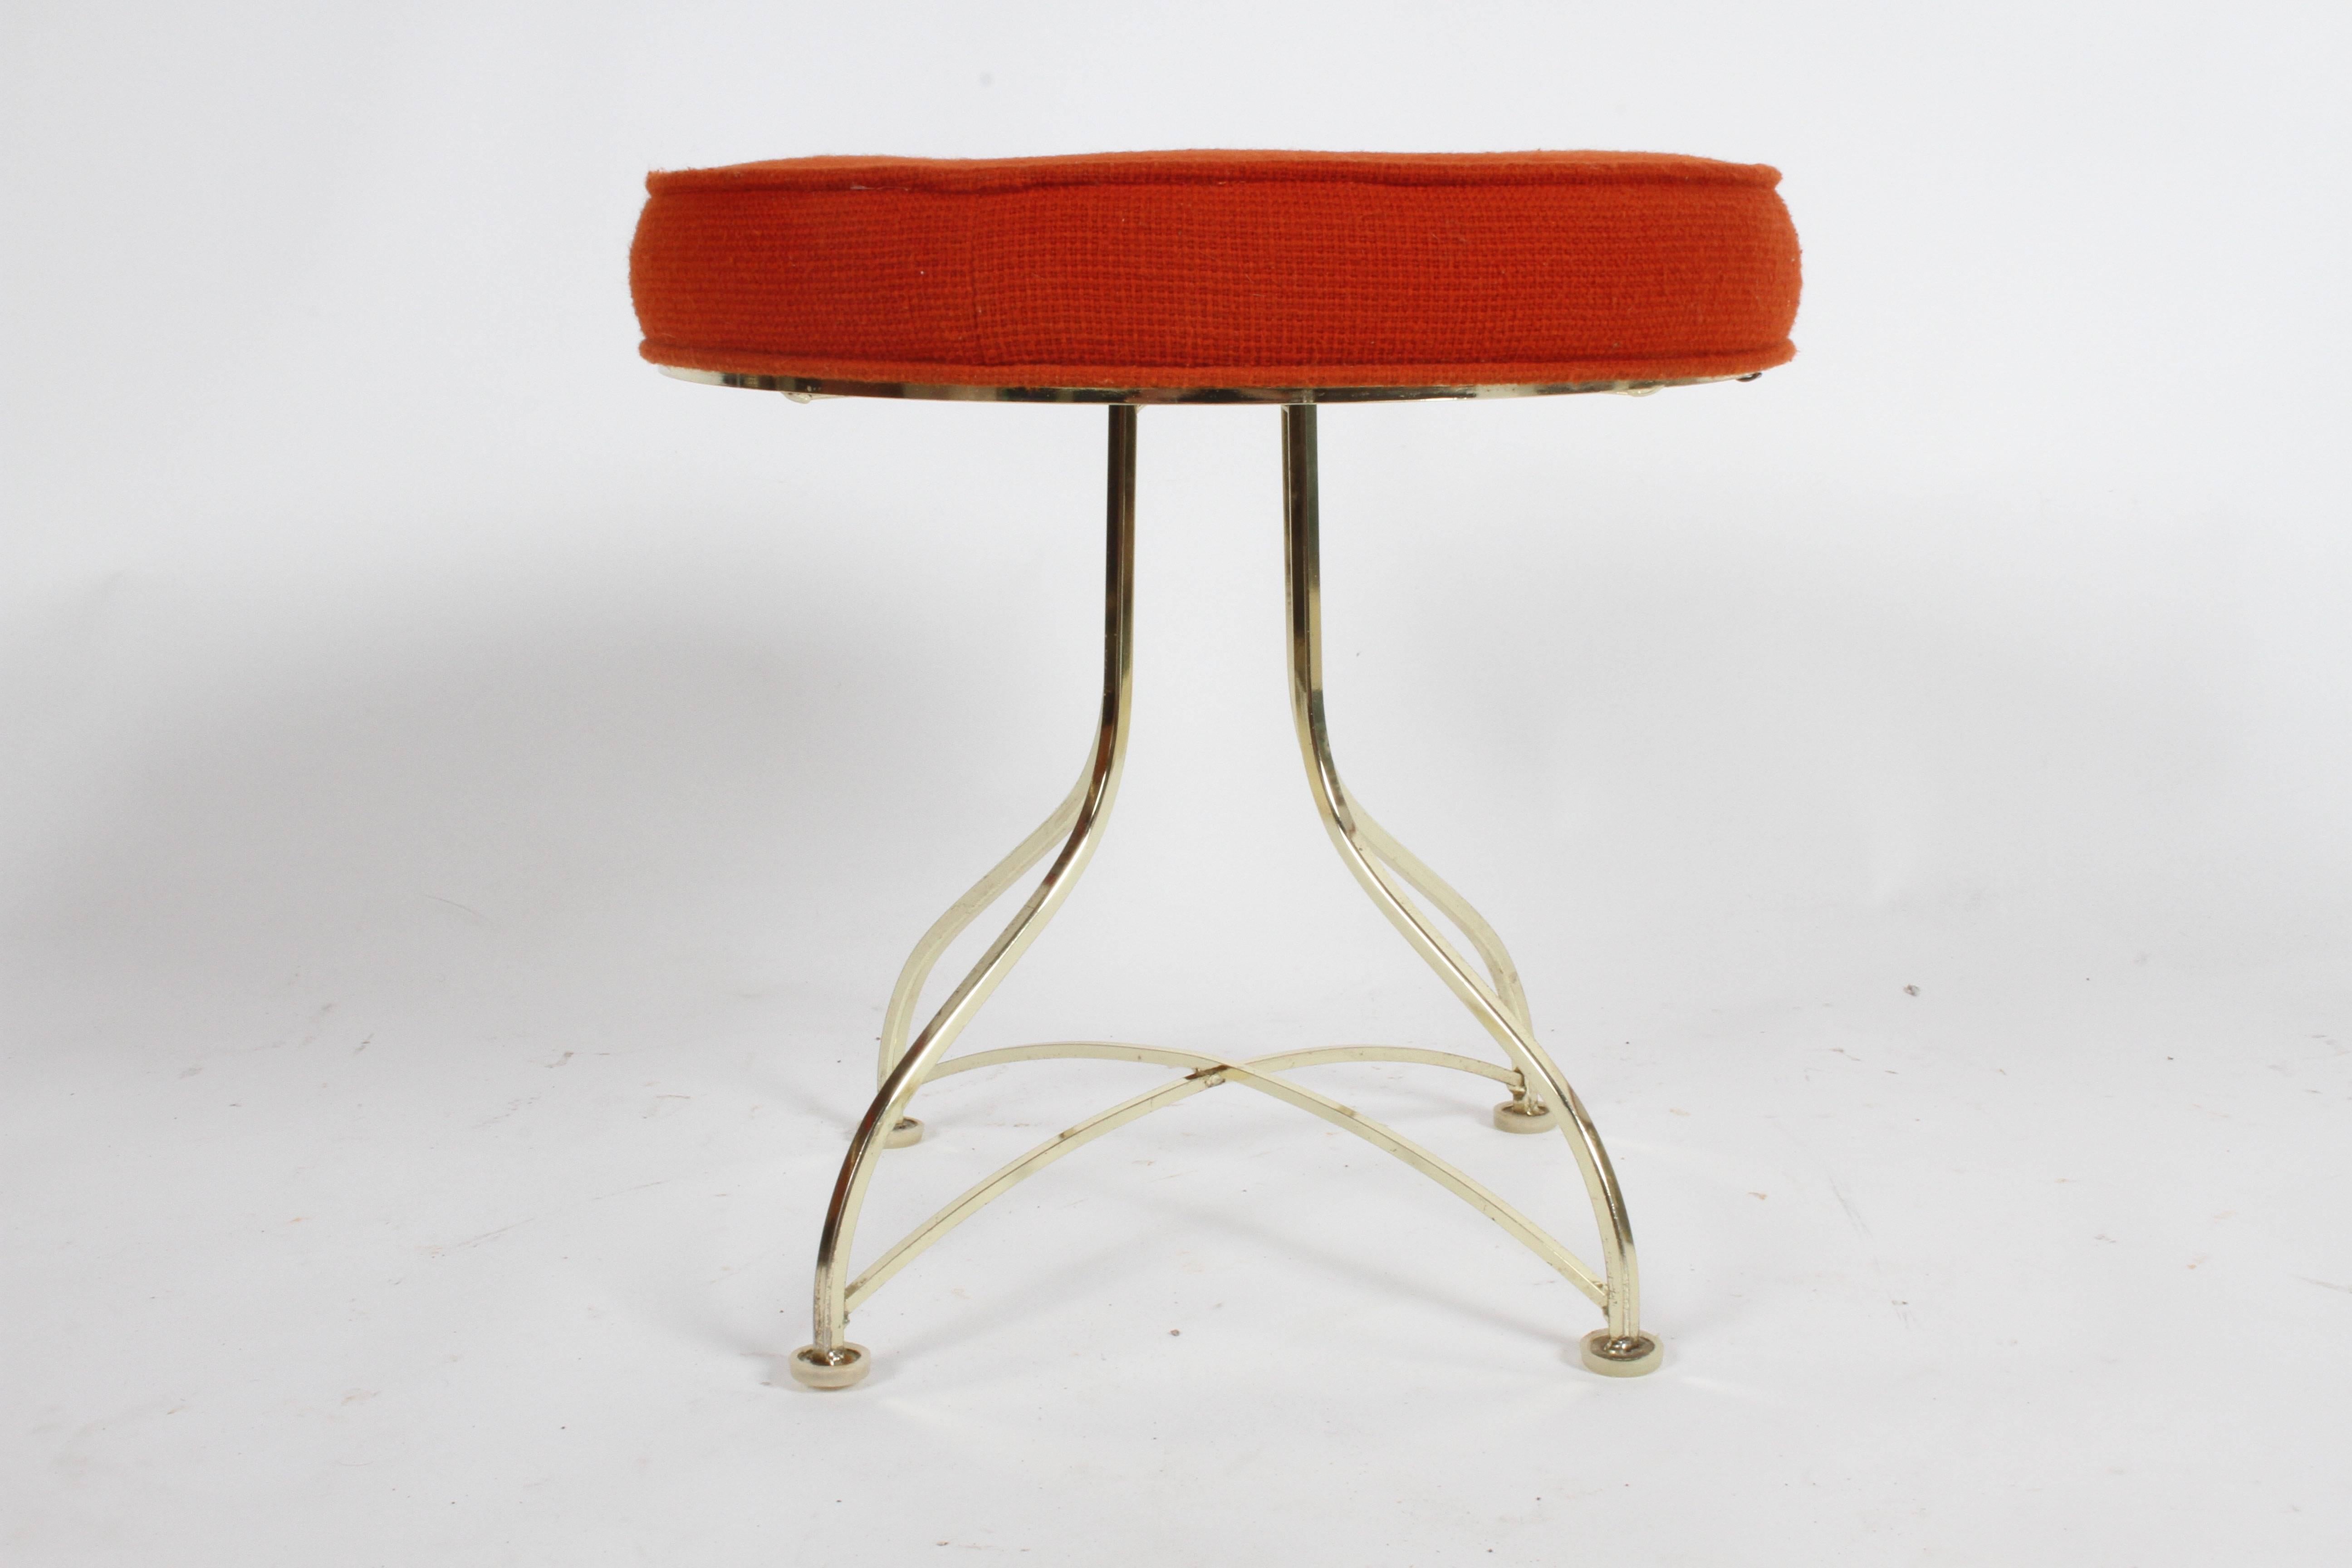 Pair of midcentury round stools or ottomans with tufted round seats and plated brass legs. Upholstery needs to be updated, shows stains. Brass plating has minor patina.